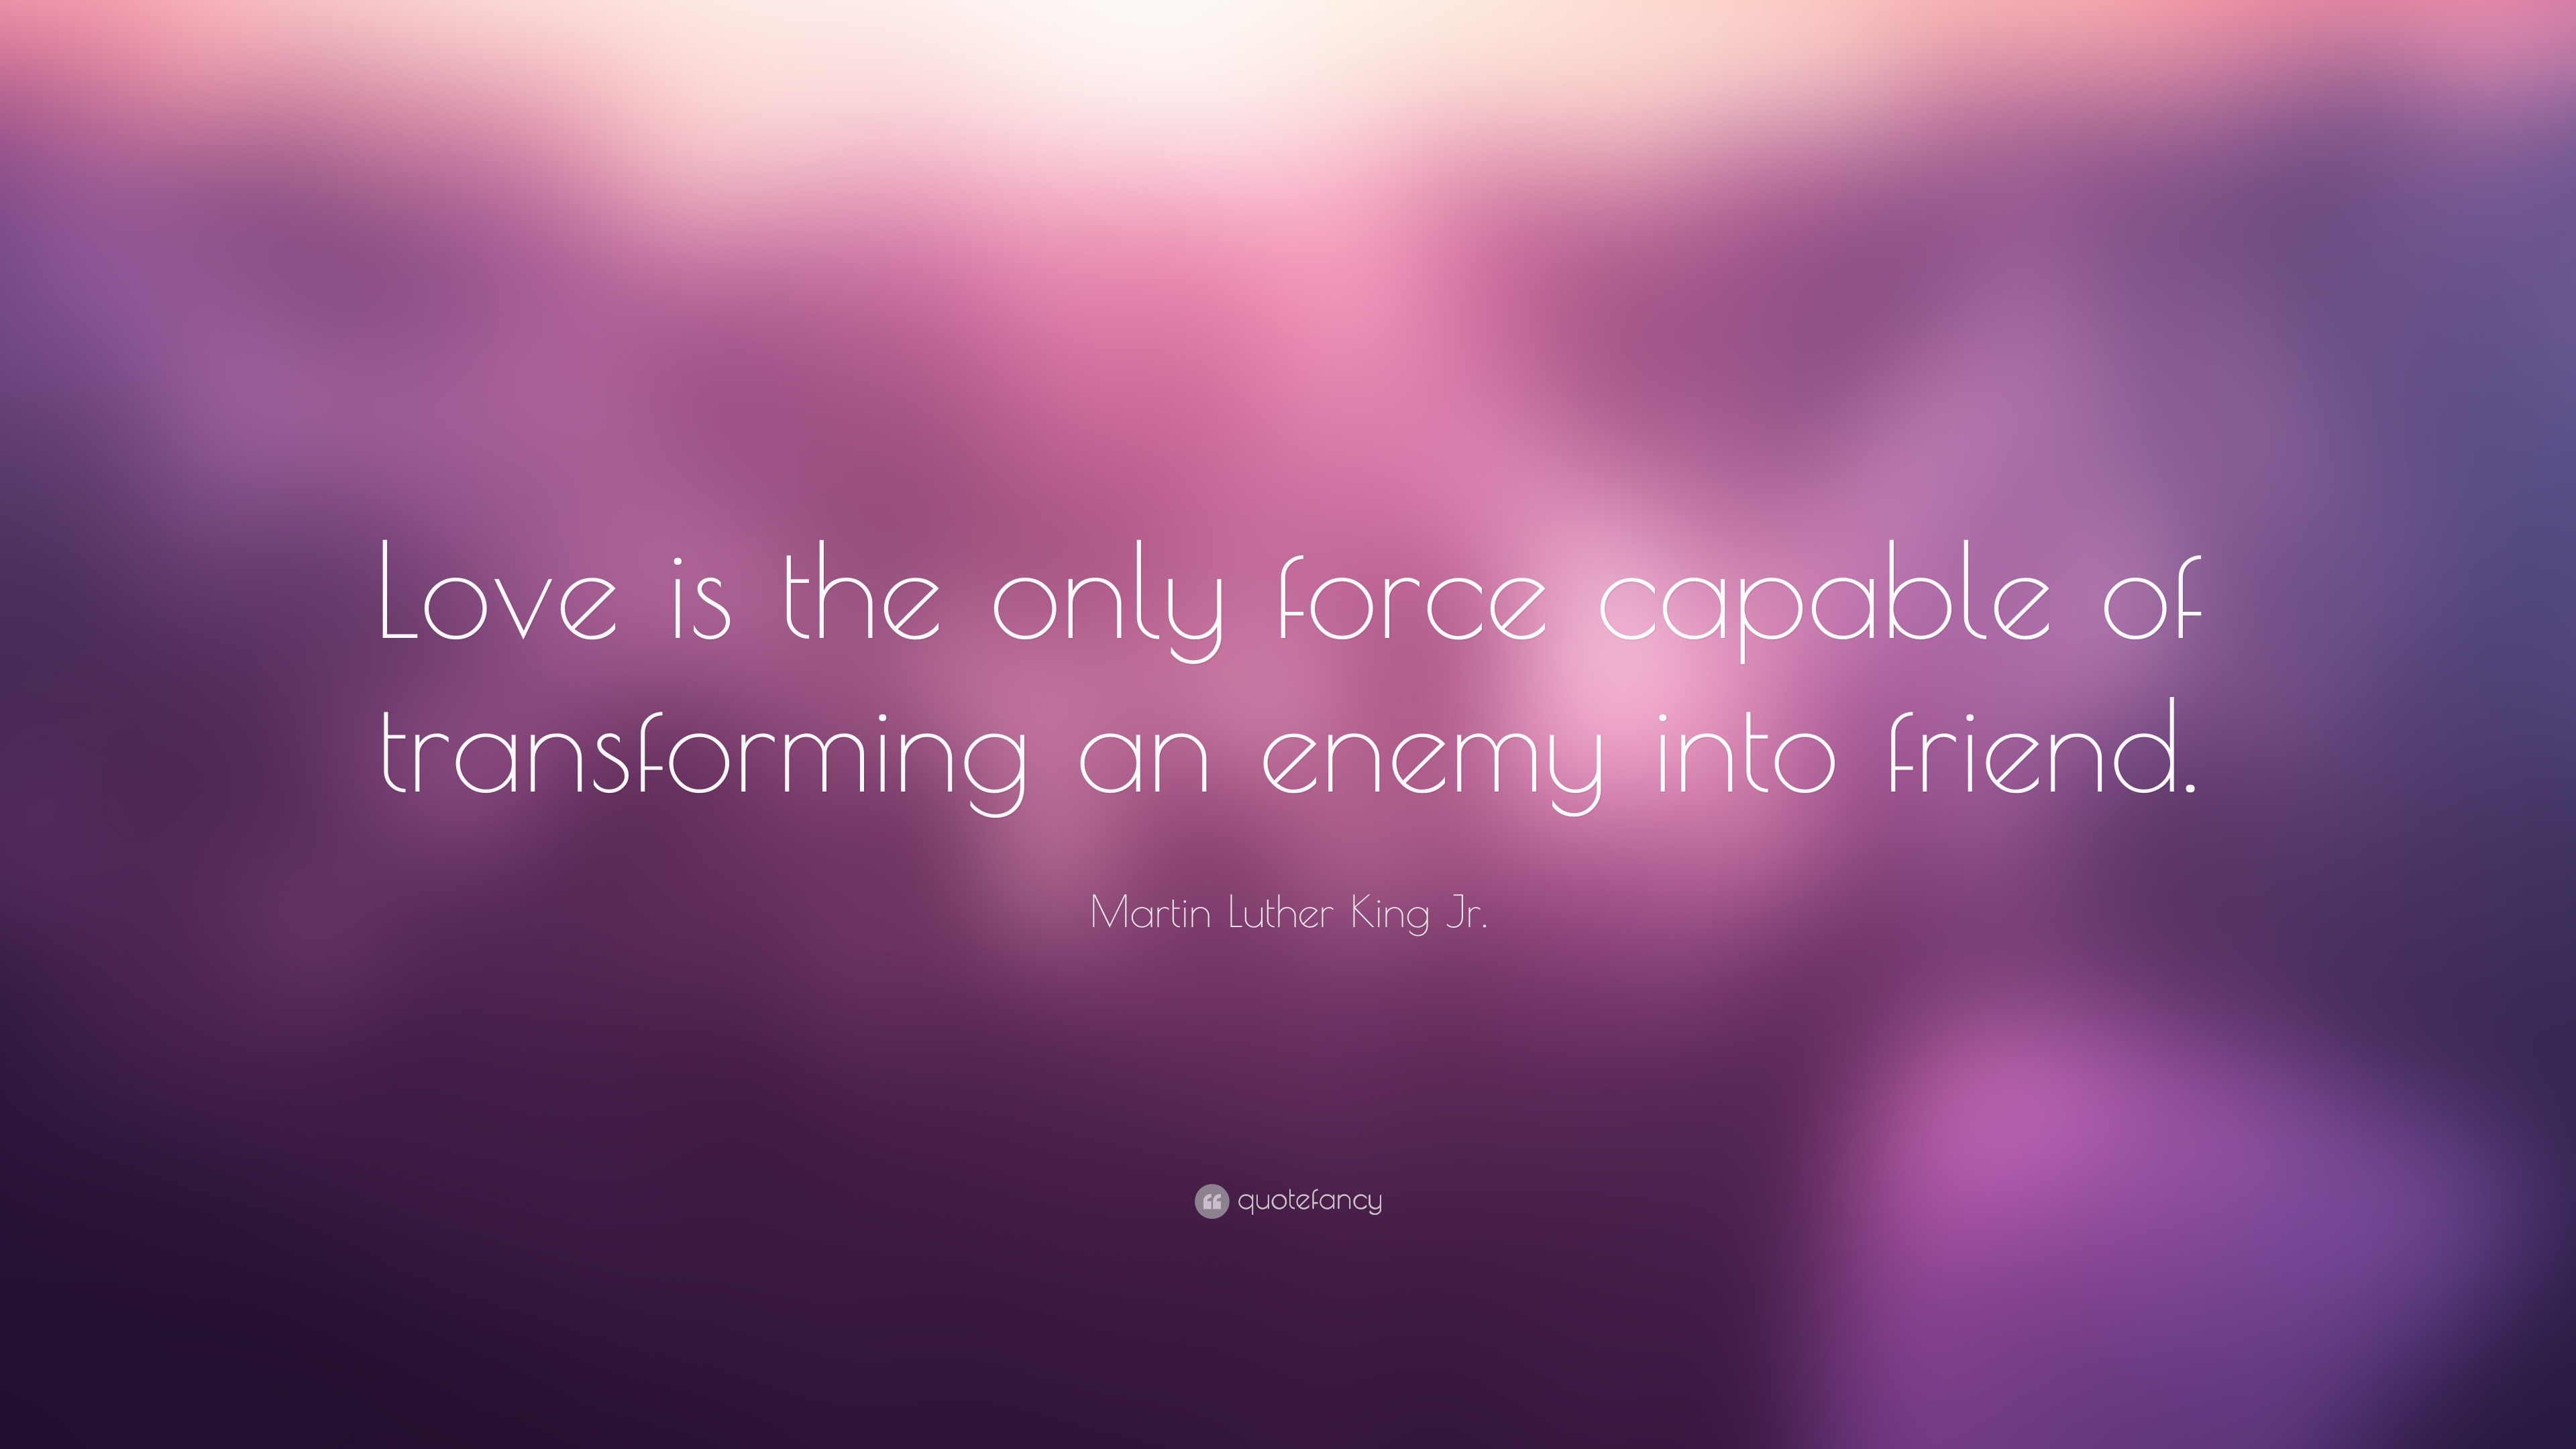 Martin Luther King Jr Quote “Love is the only force capable of transforming